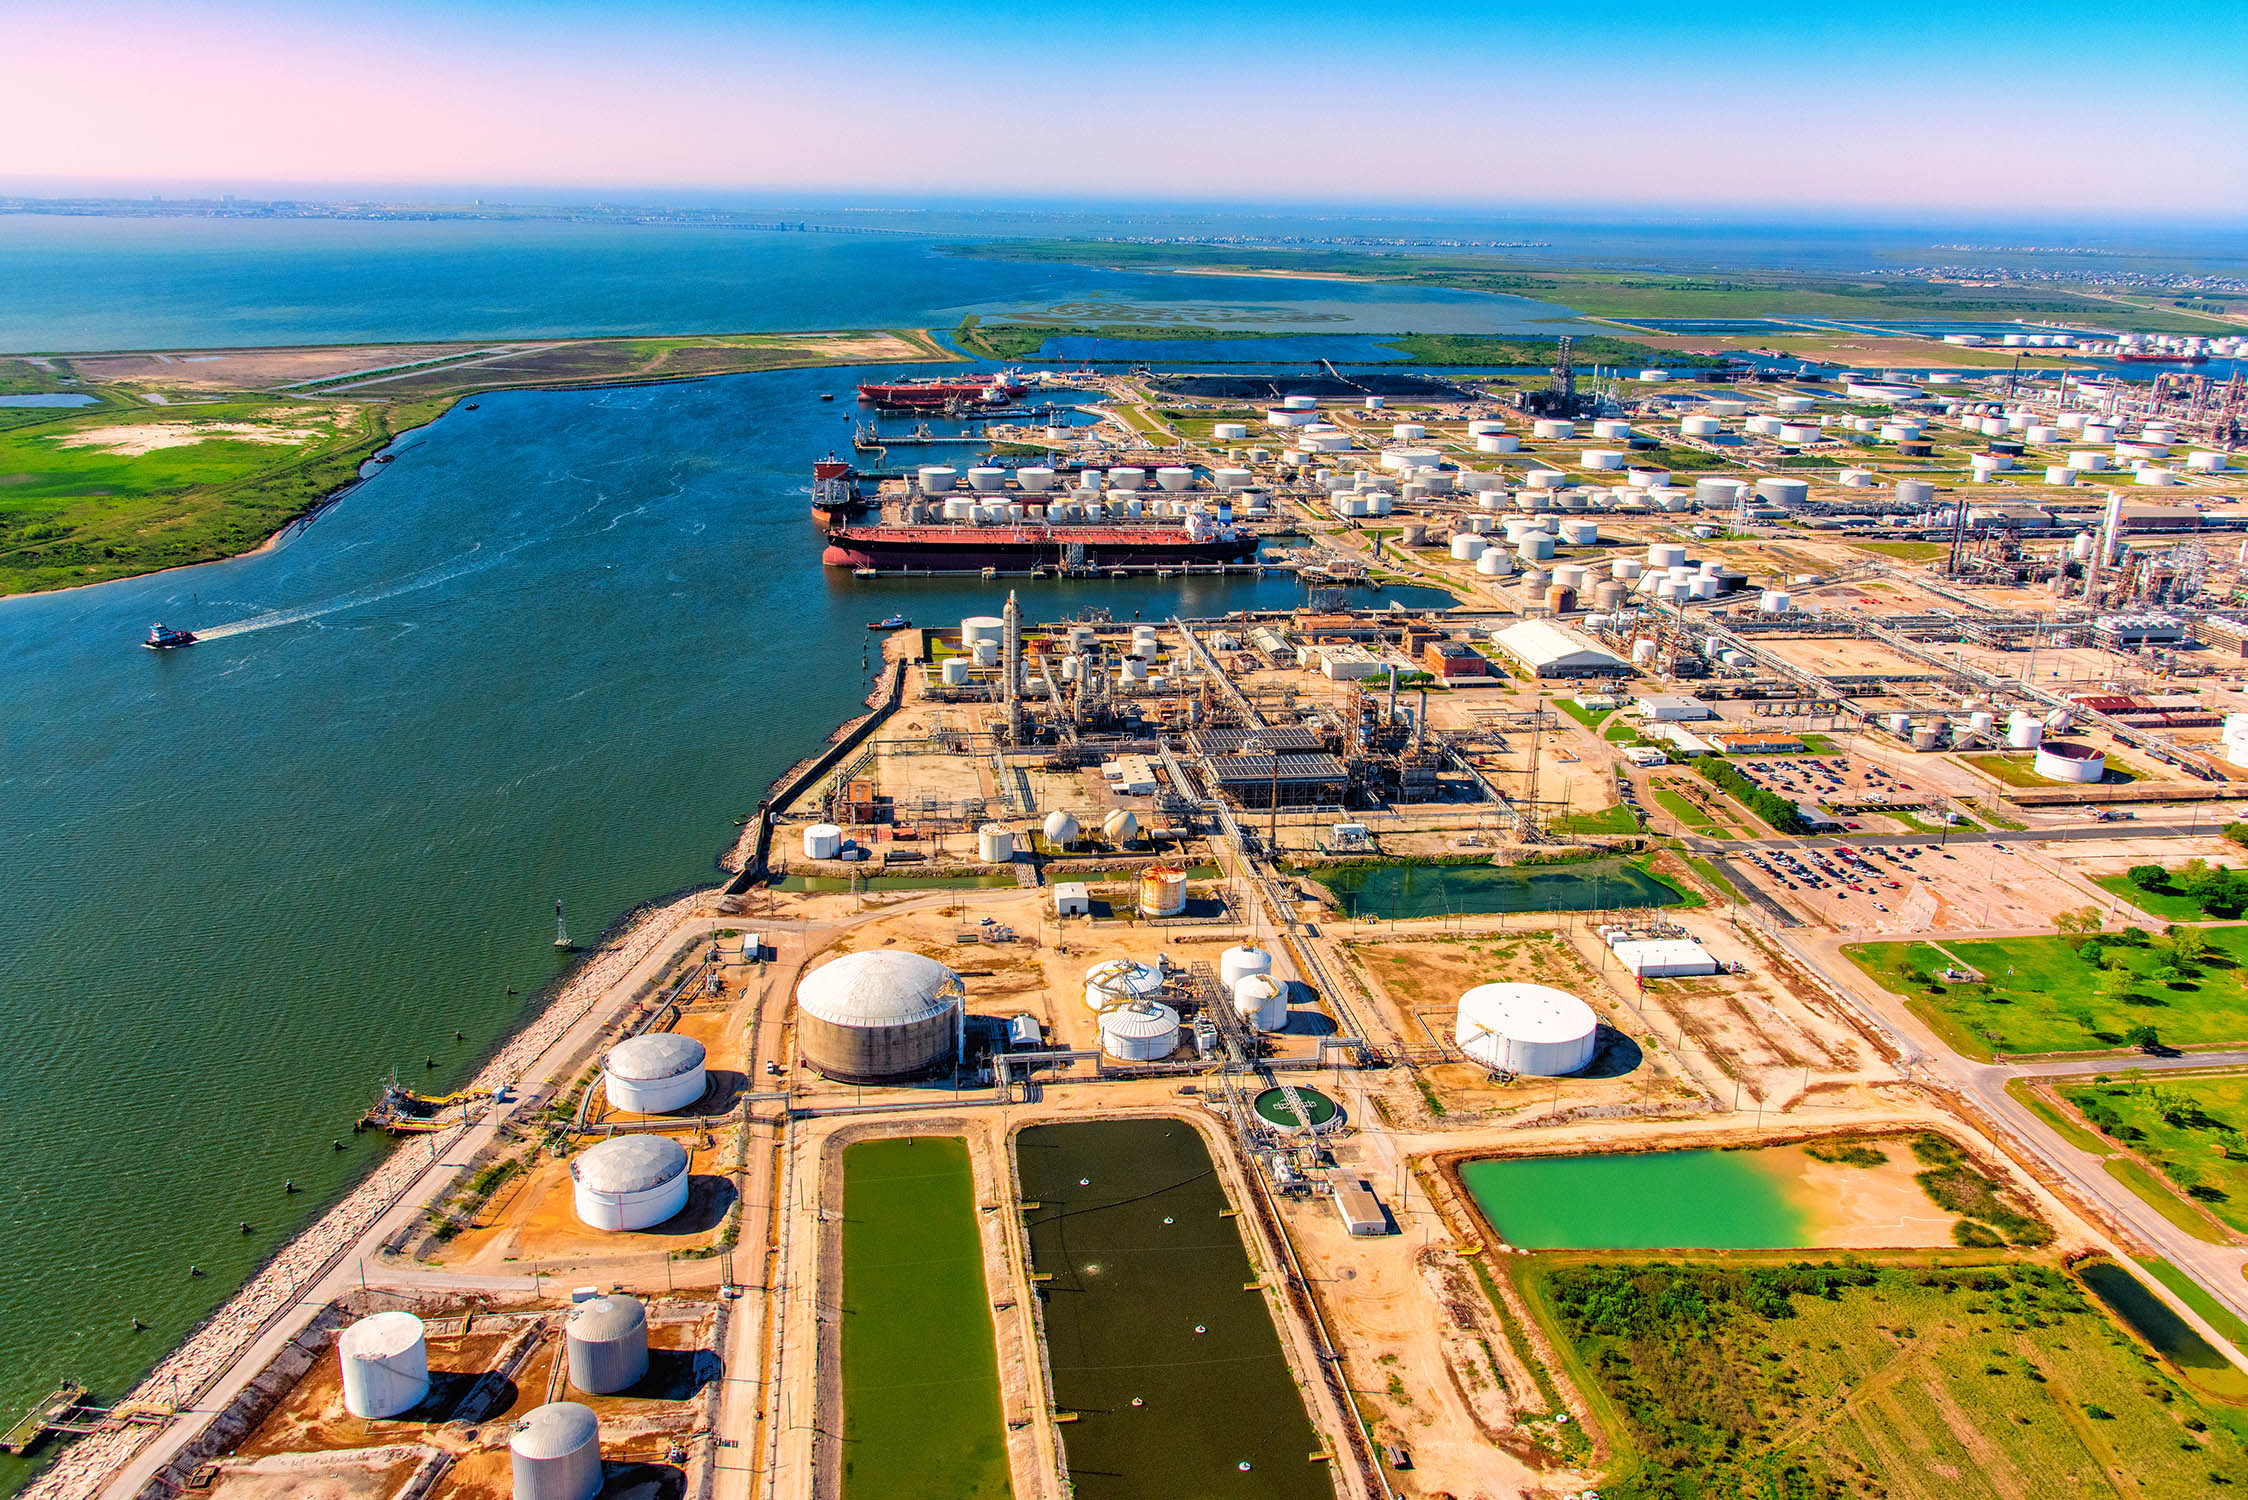 Aerial view of international oil tankers docked at a U.S. oil refinery off the Gulf of Mexico in Texas City, Texas located just south of Houston